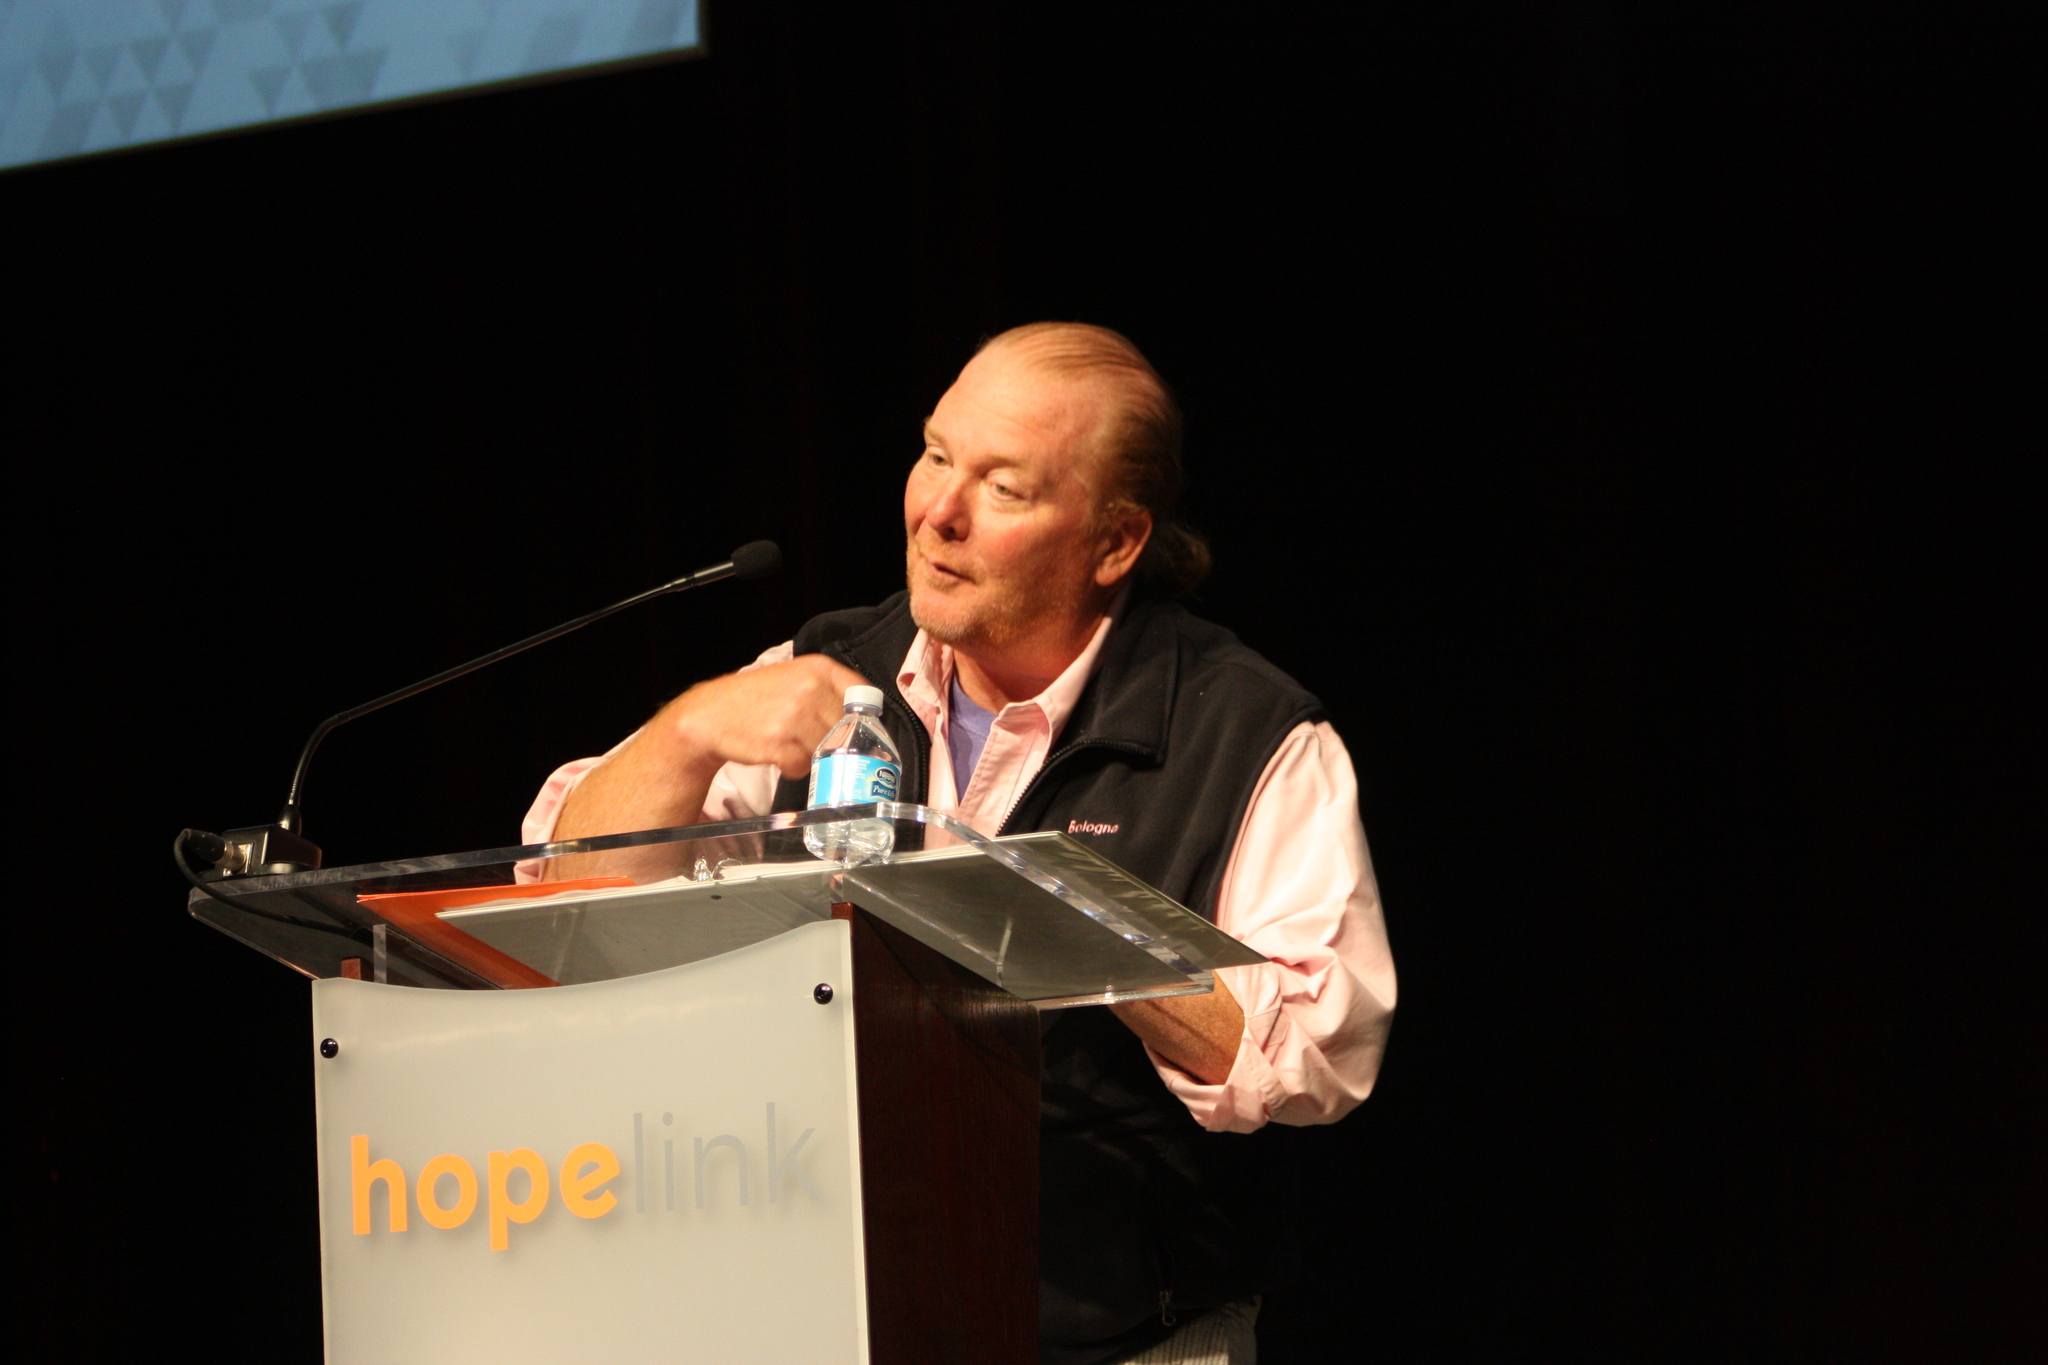 Chef and Seattle-area native Mario Batali shares one of many food-related stories at Hopelink’s Reaching Out Luncheon on Monday at the Meydenbauer Convention Center in Bellevue. Samantha Pak, Redmond Reporter